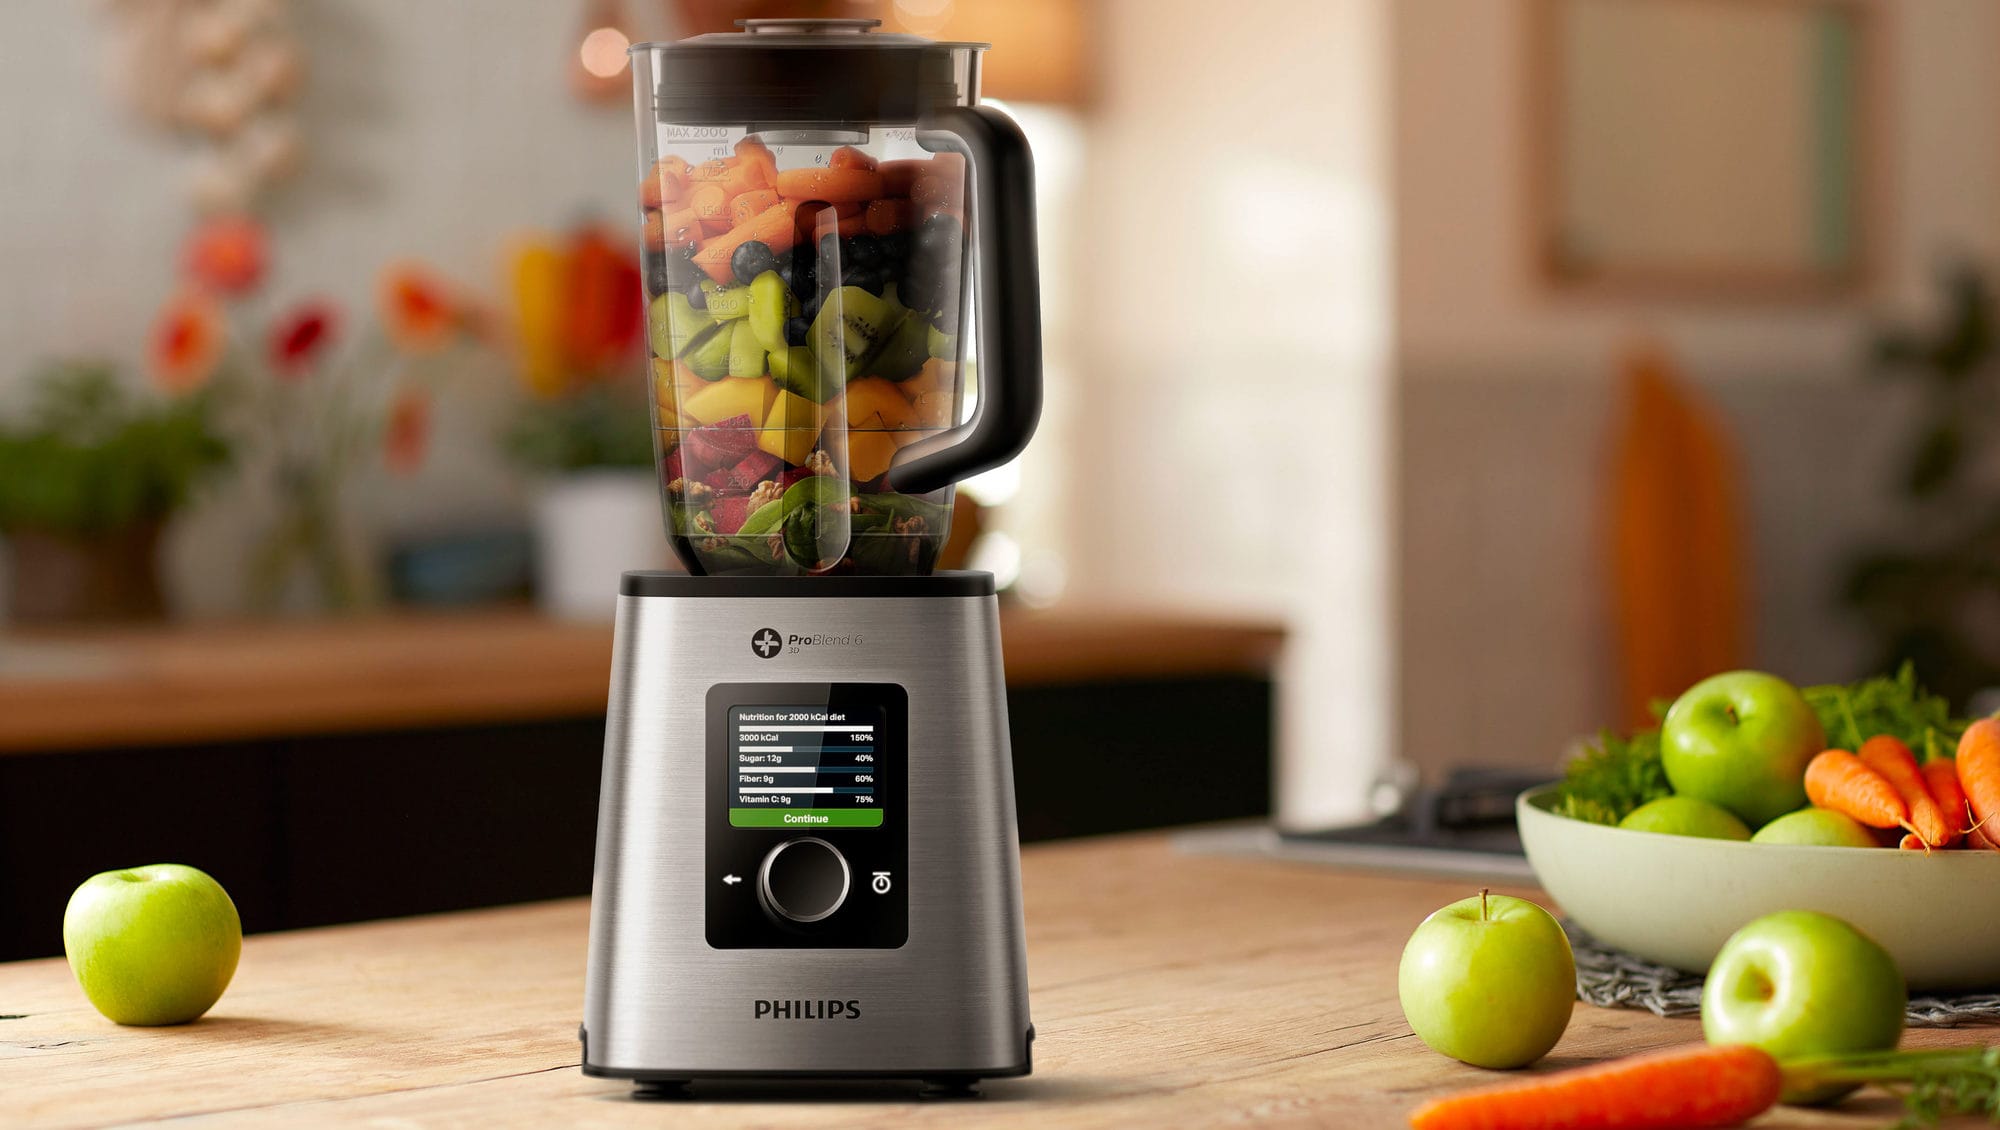 Philips Kitchen Solutions at IFA 2018 – An app-enabled blender and perfect coffee